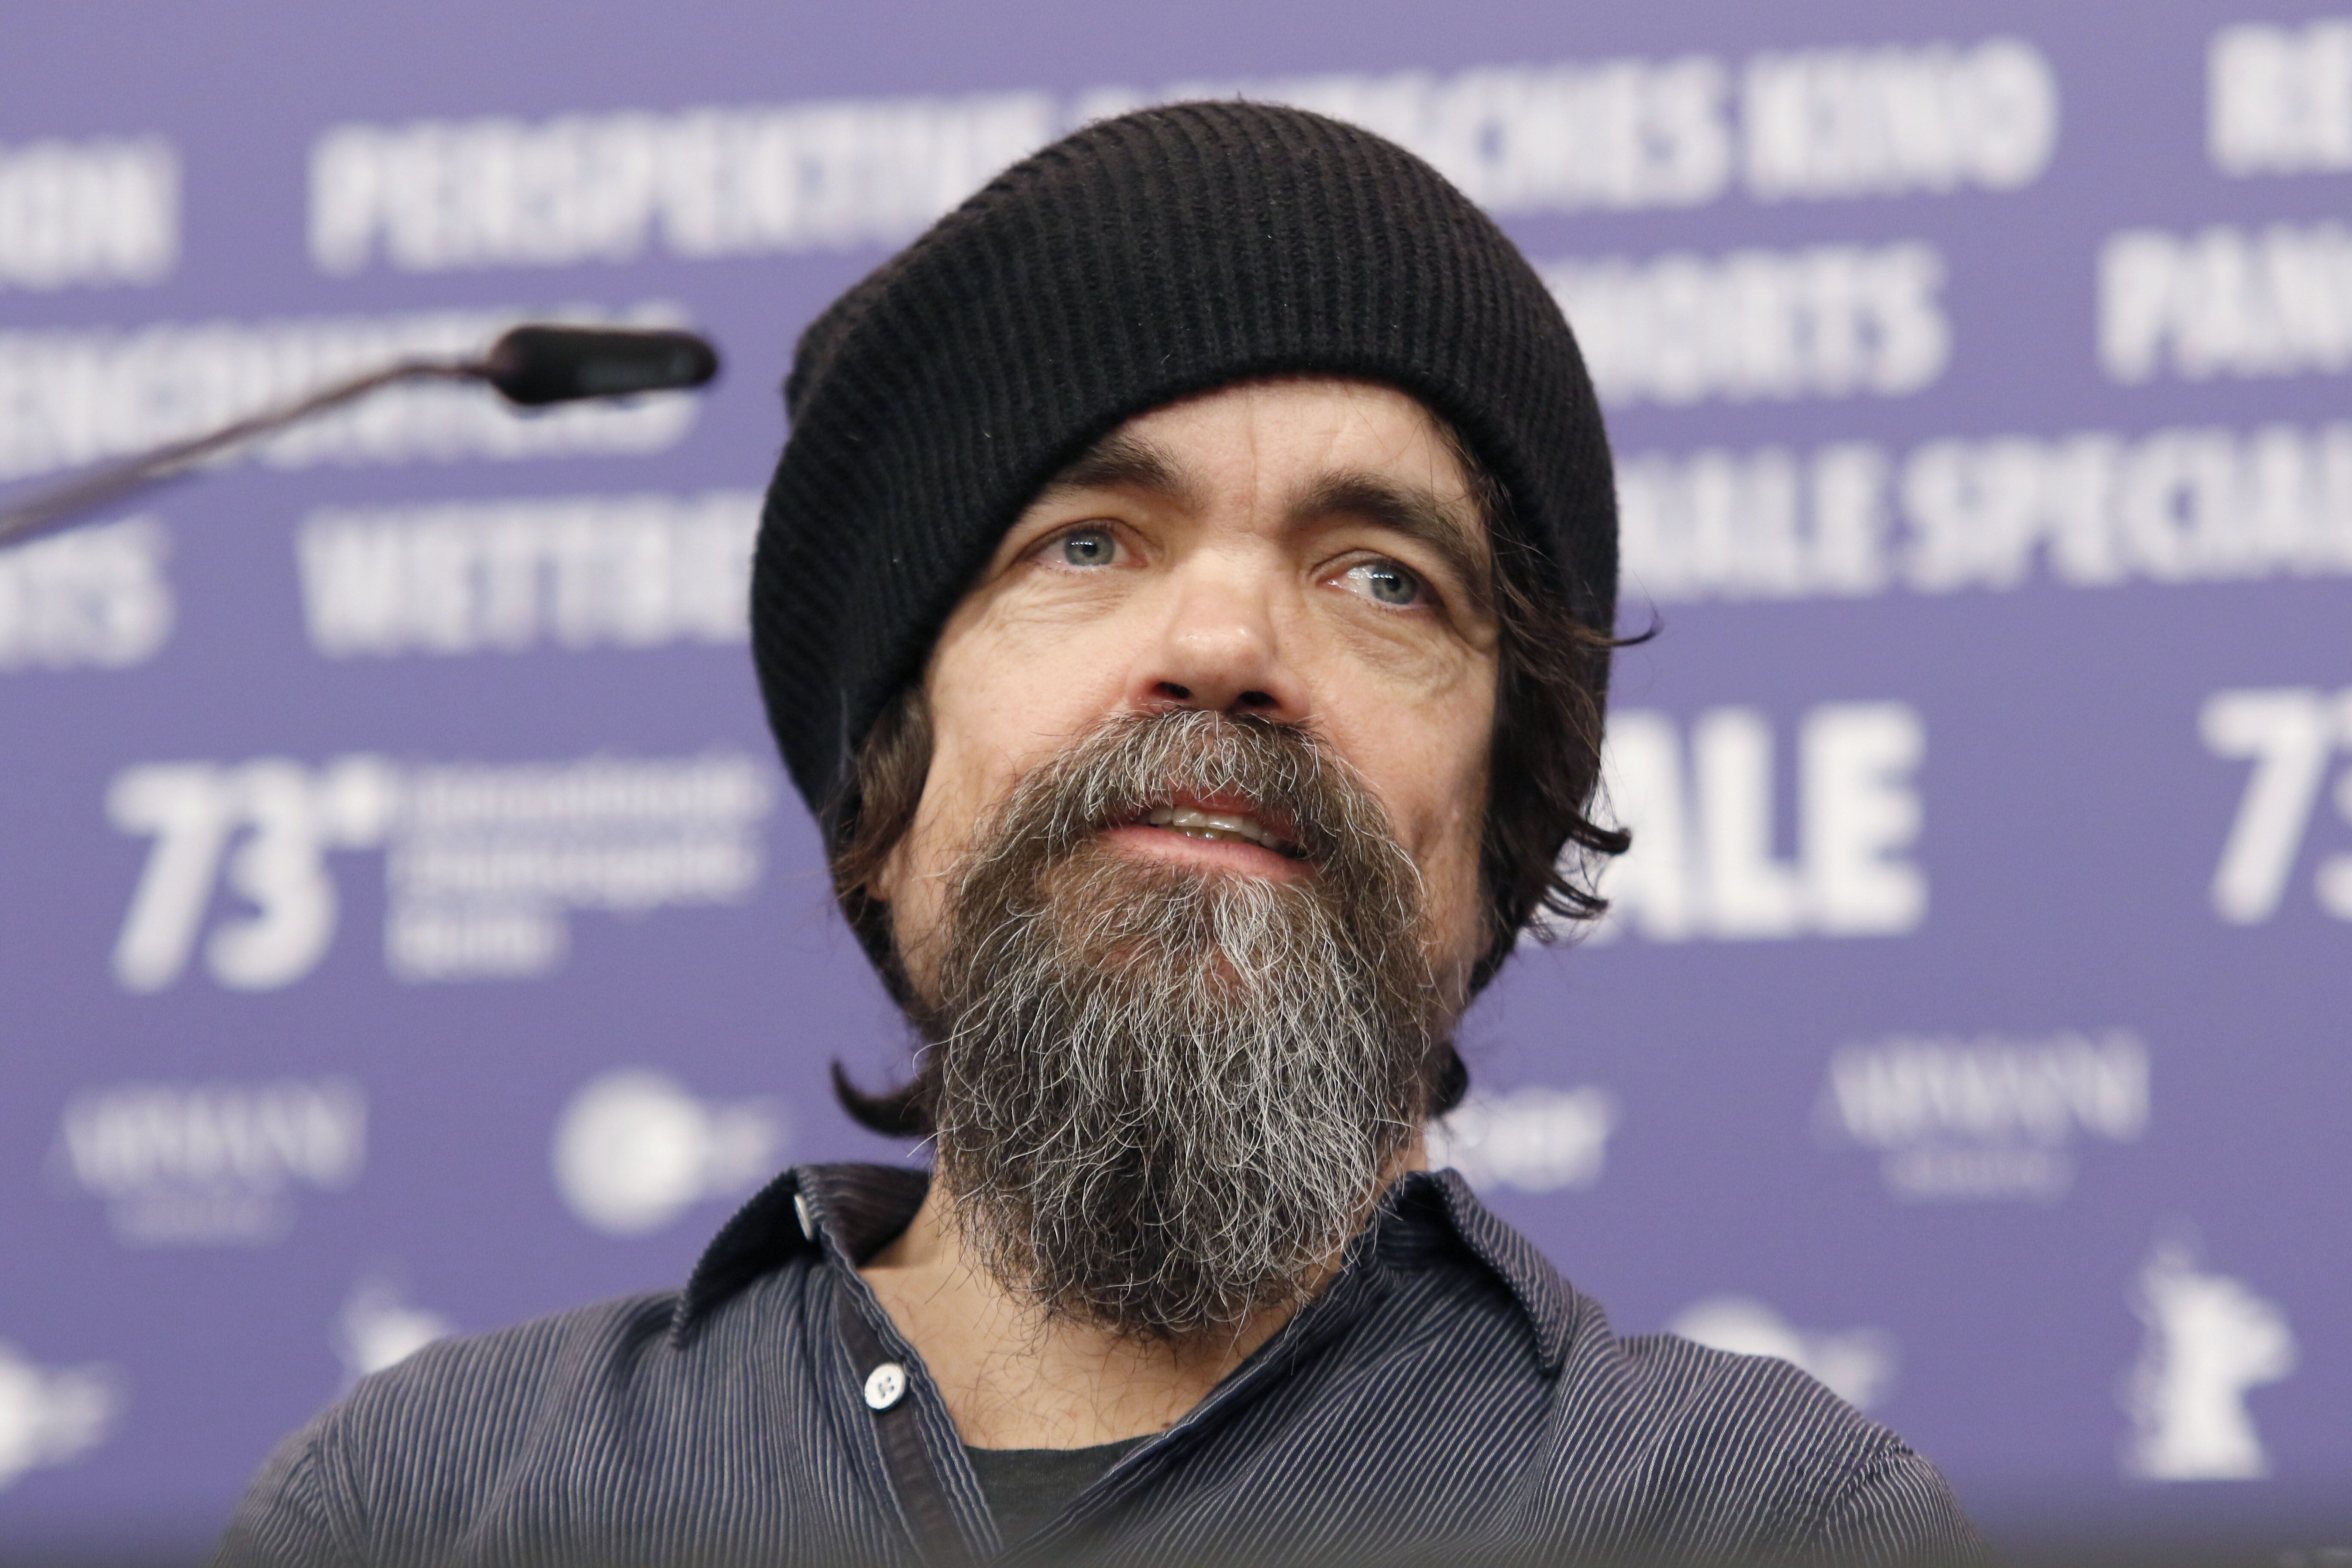 Peter Dinklage during a press interview